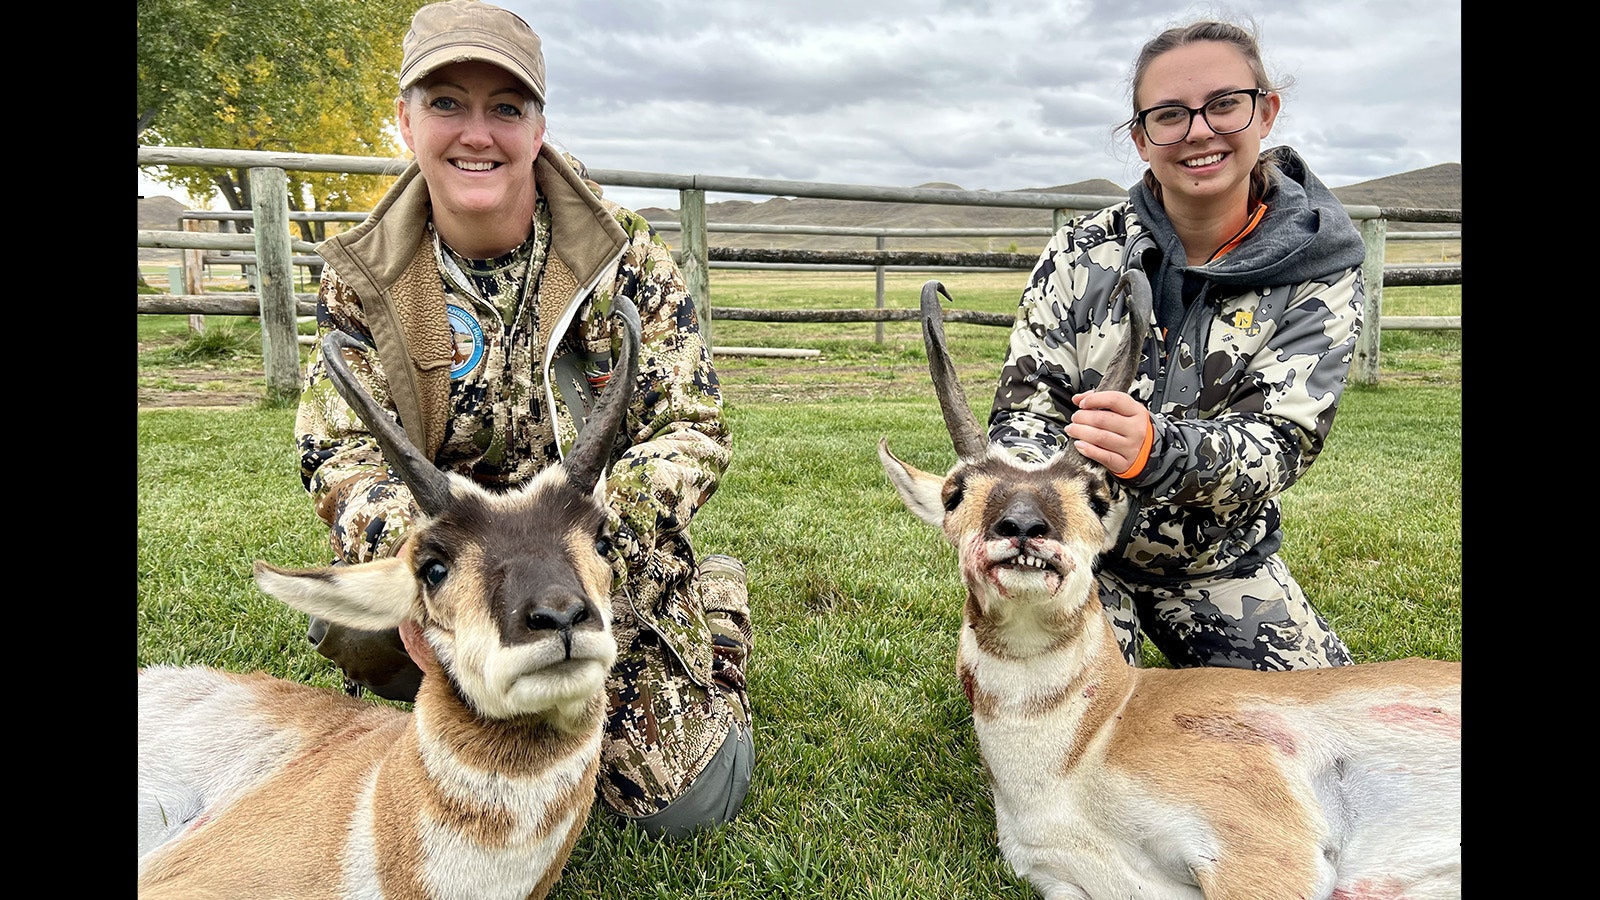 Becky Rodriguez, left, and Harley Gonzales with their antelope during last week's Wyoming Women's Antelope Hunt.